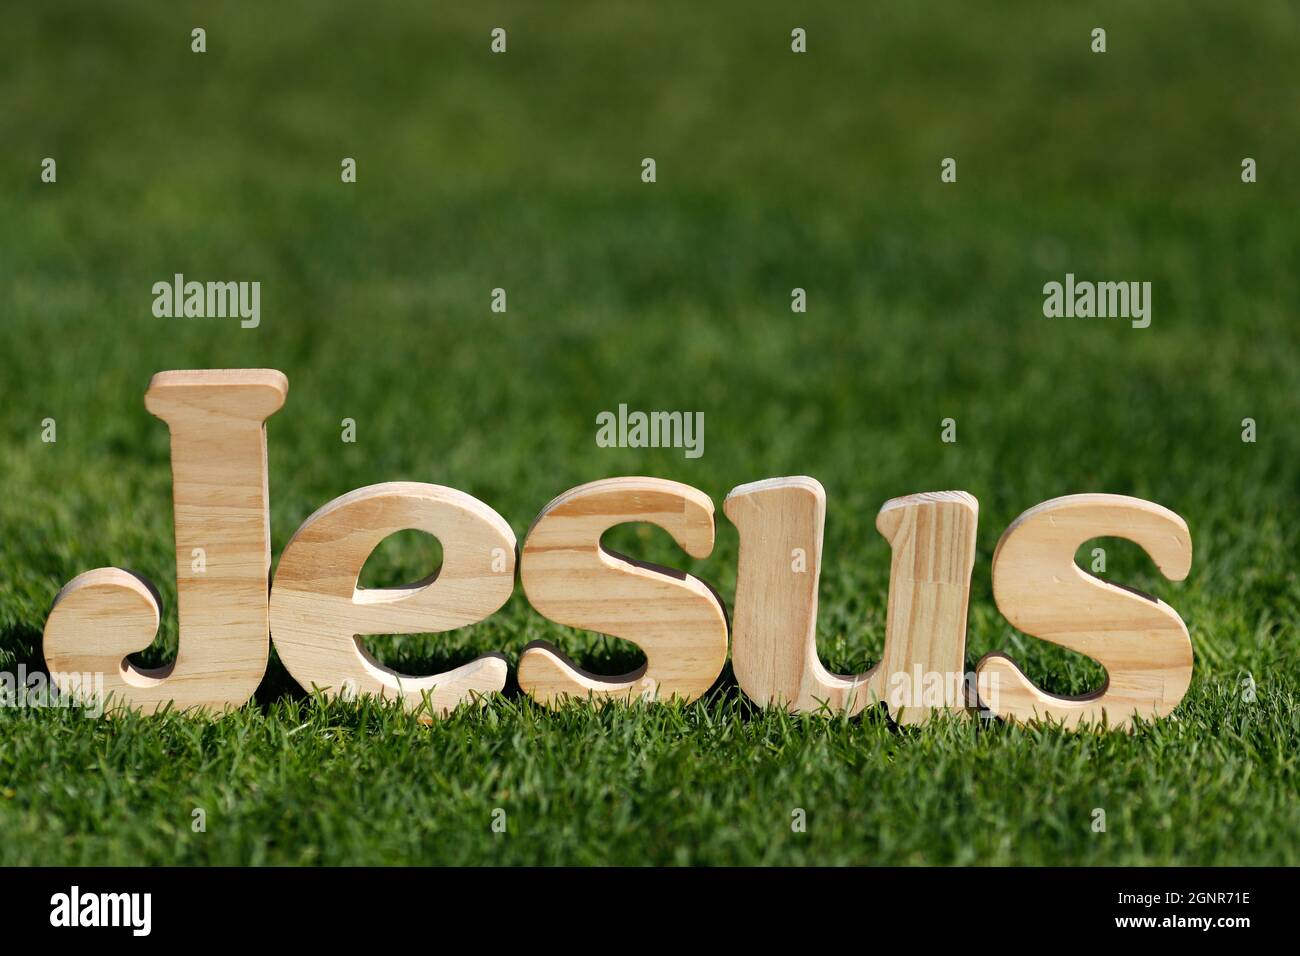 Wooden Letters Forming The Word Jesus On A Background Of Green